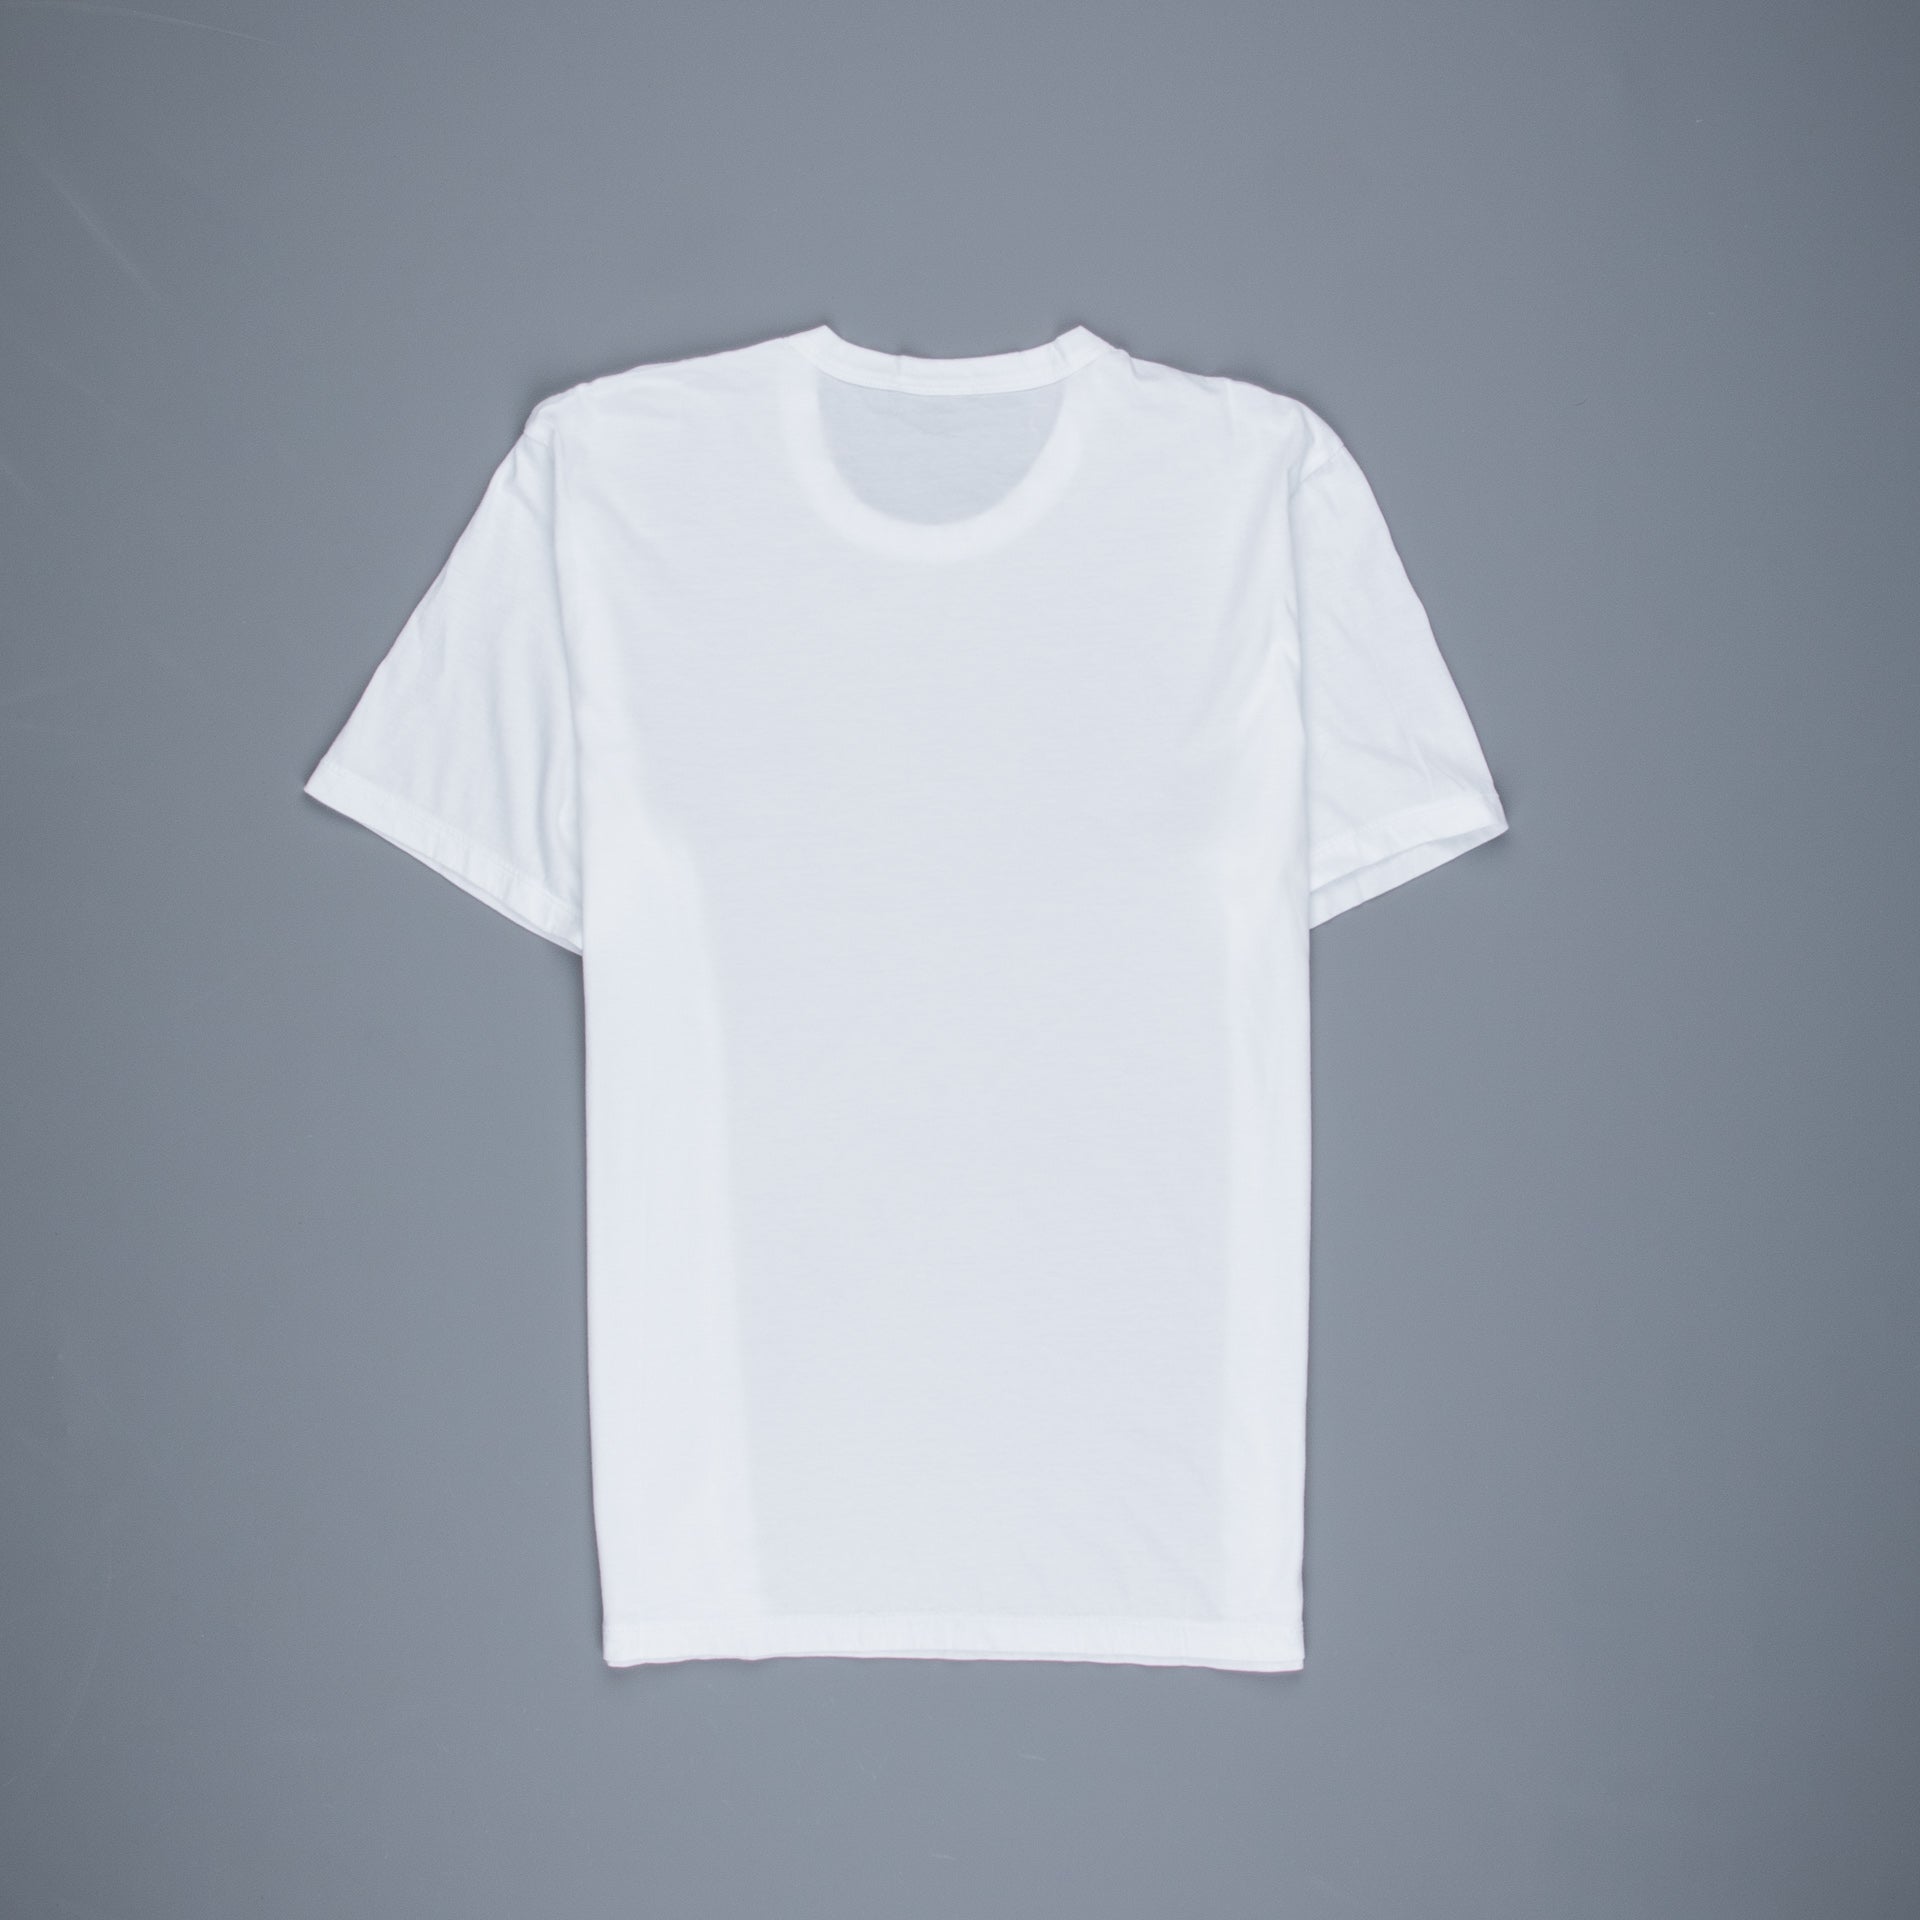 James Perse Elevated Lotus jersey short sleeve crew neck tee white